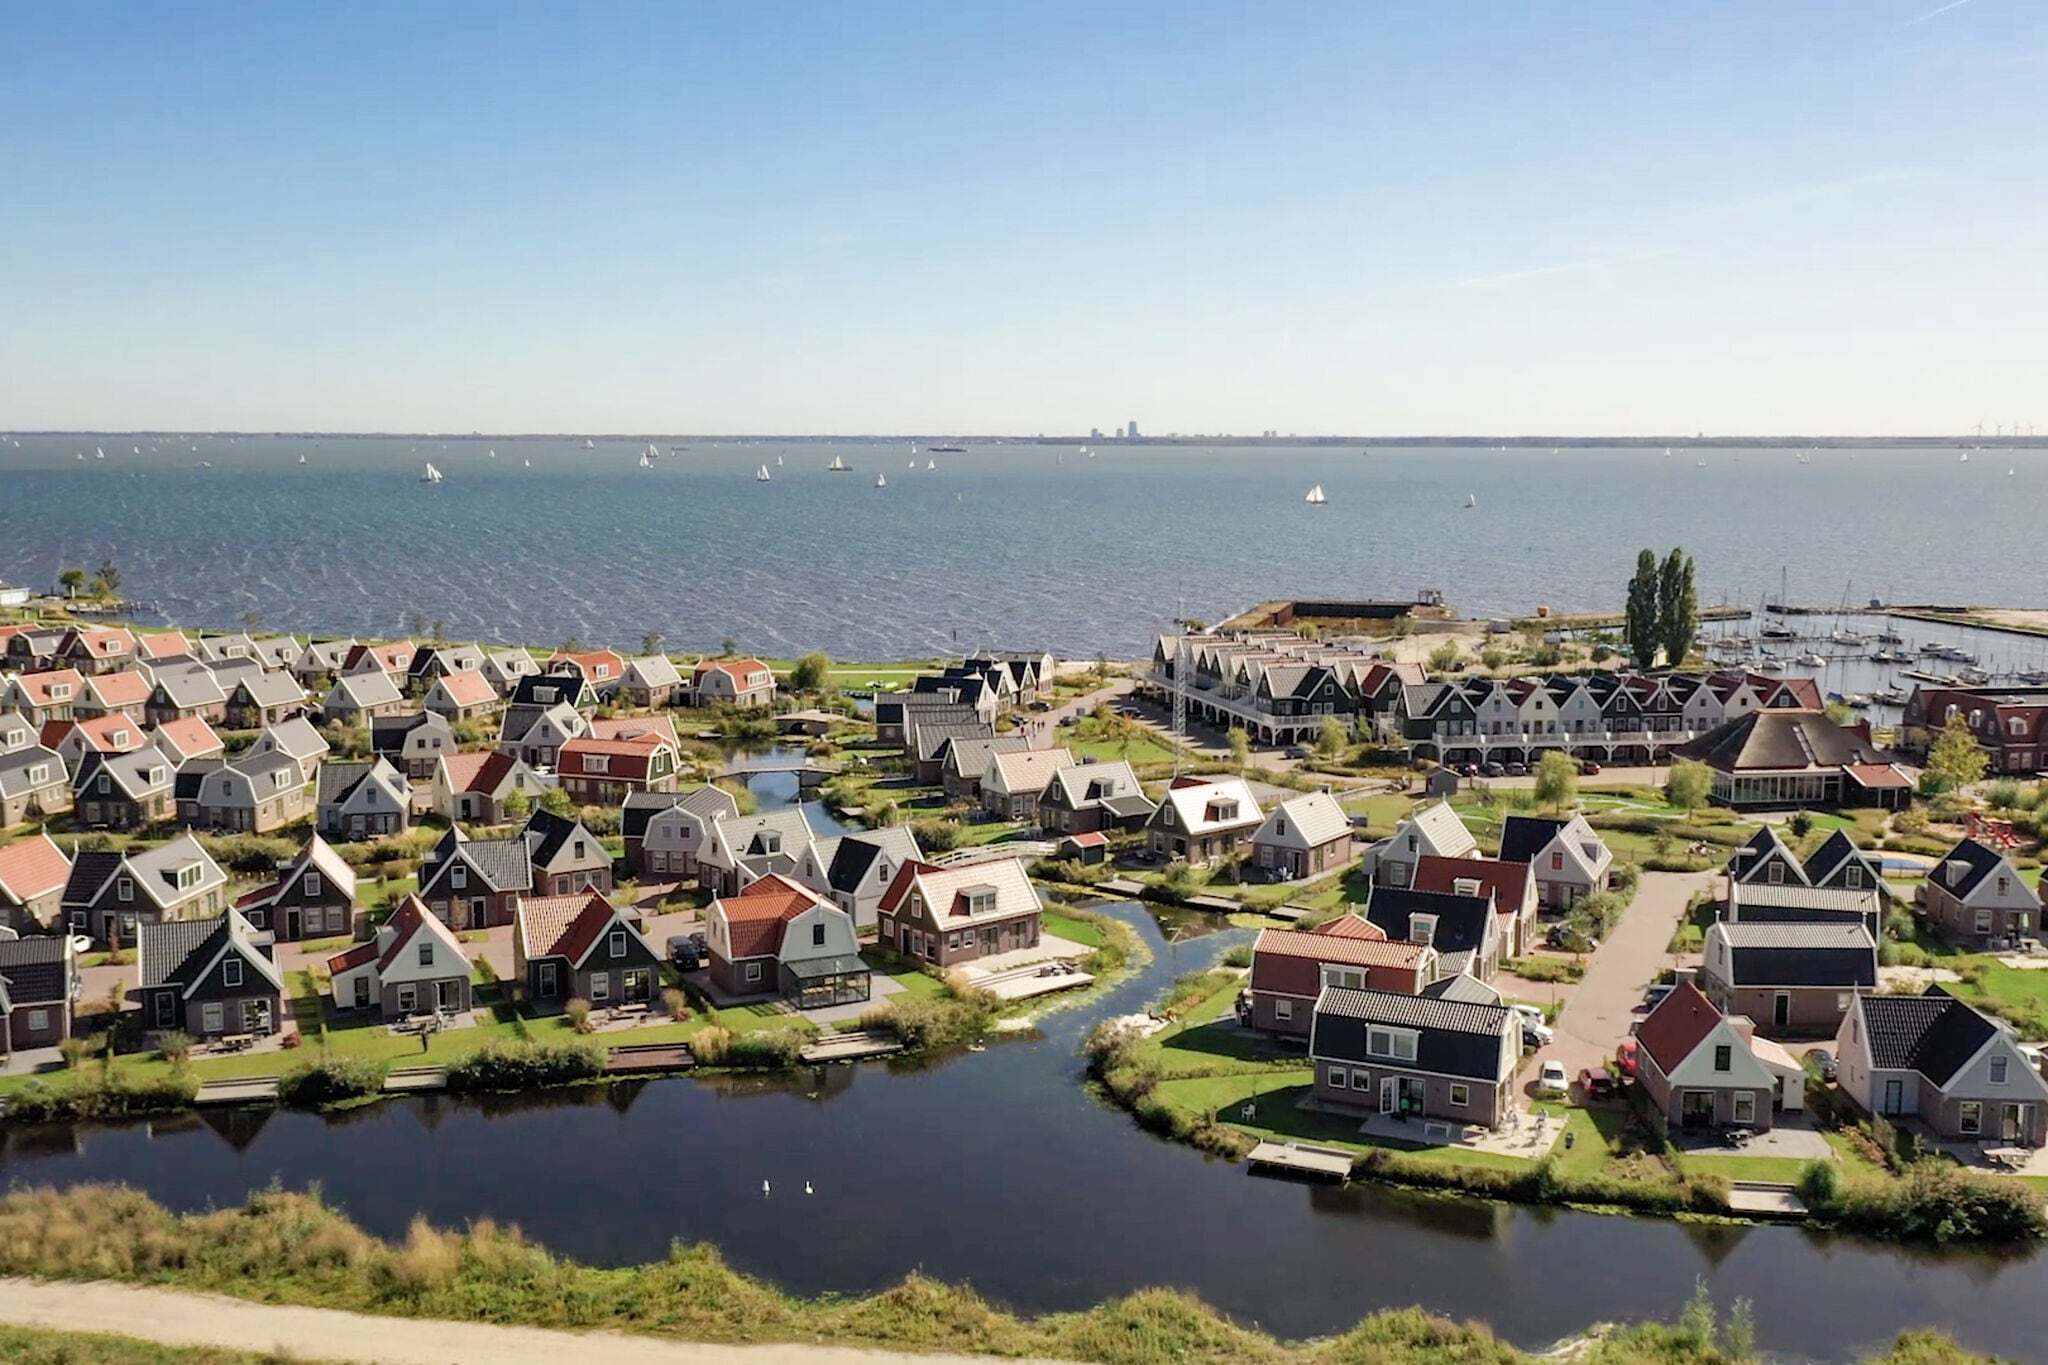 Detached holiday home on the Markermeer